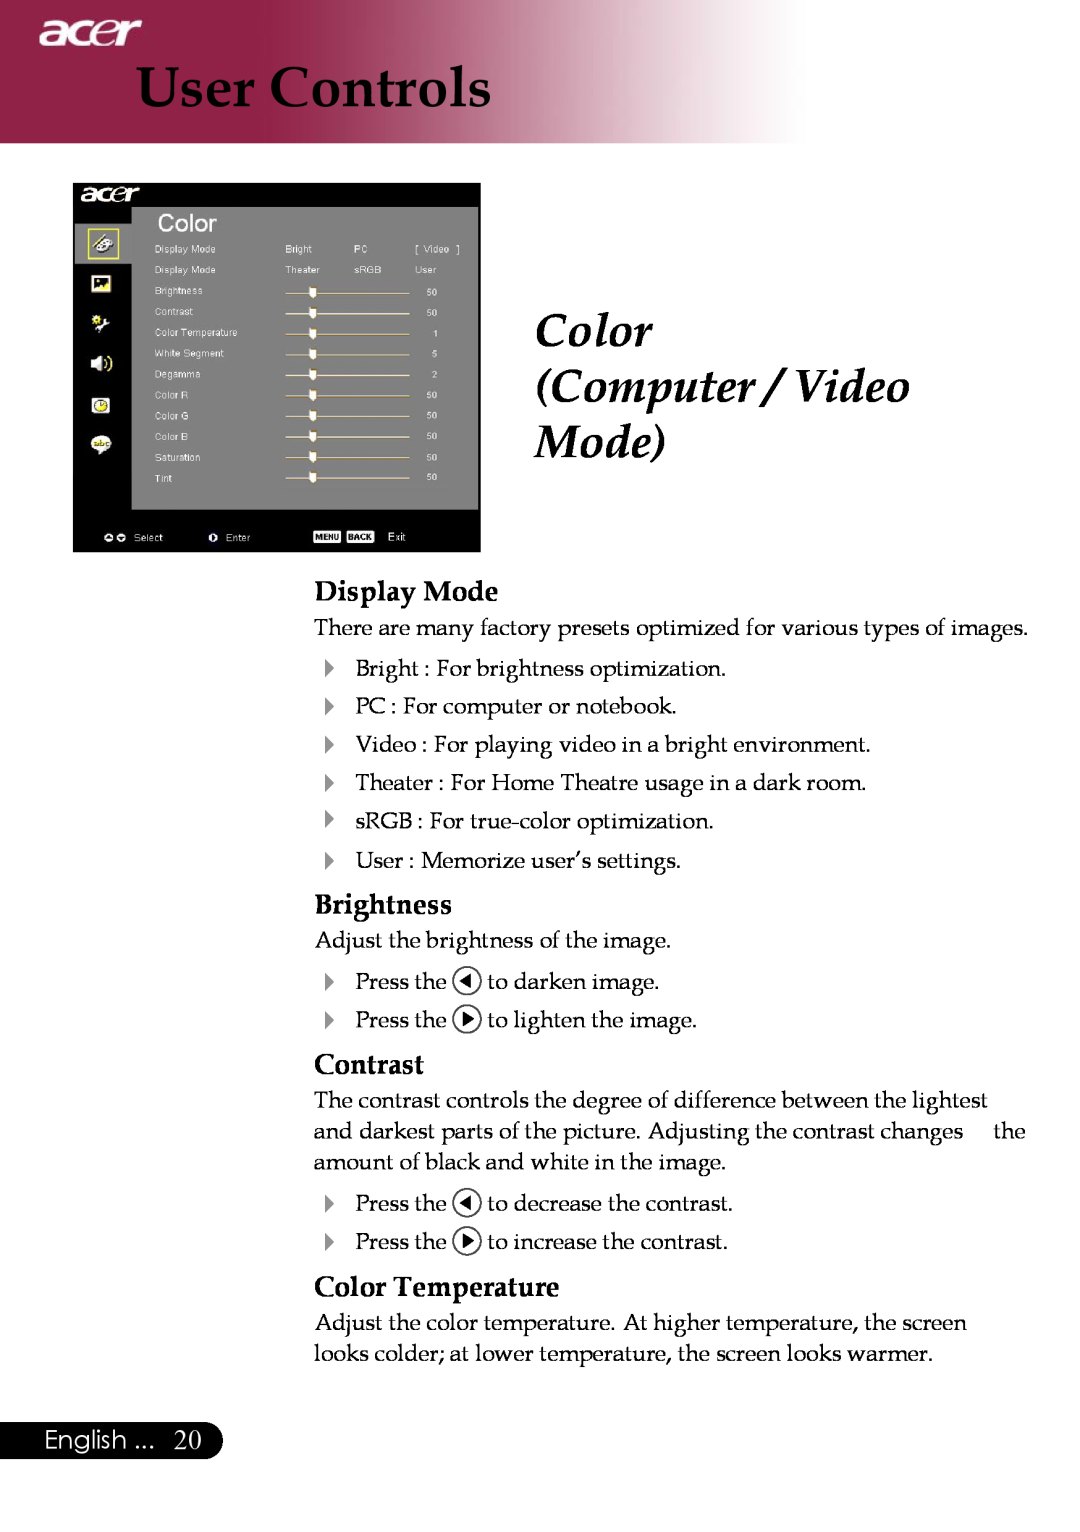 Acer PD323 Color Computer / Video Mode, Display Mode, Brightness, Contrast, Color Temperature, User Controls, English 